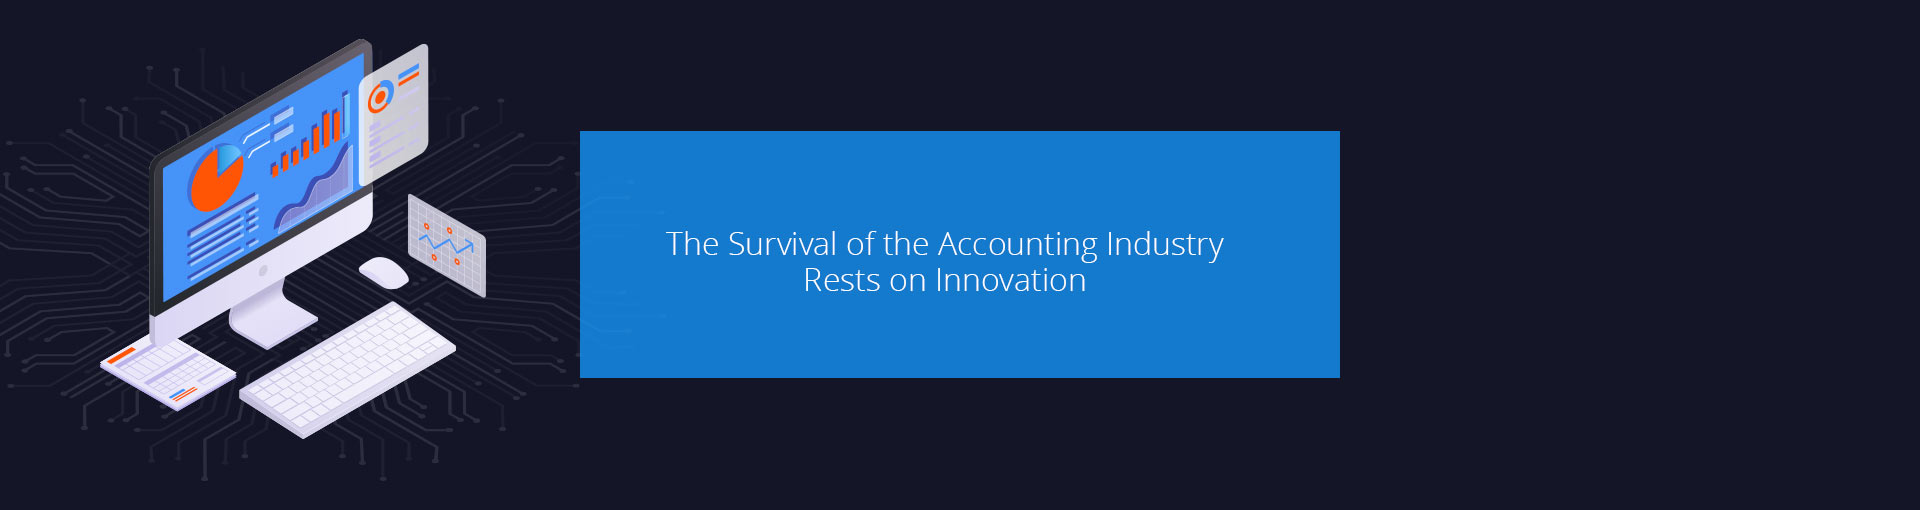 The Survival of the Accounting Industry Rests on Innovation